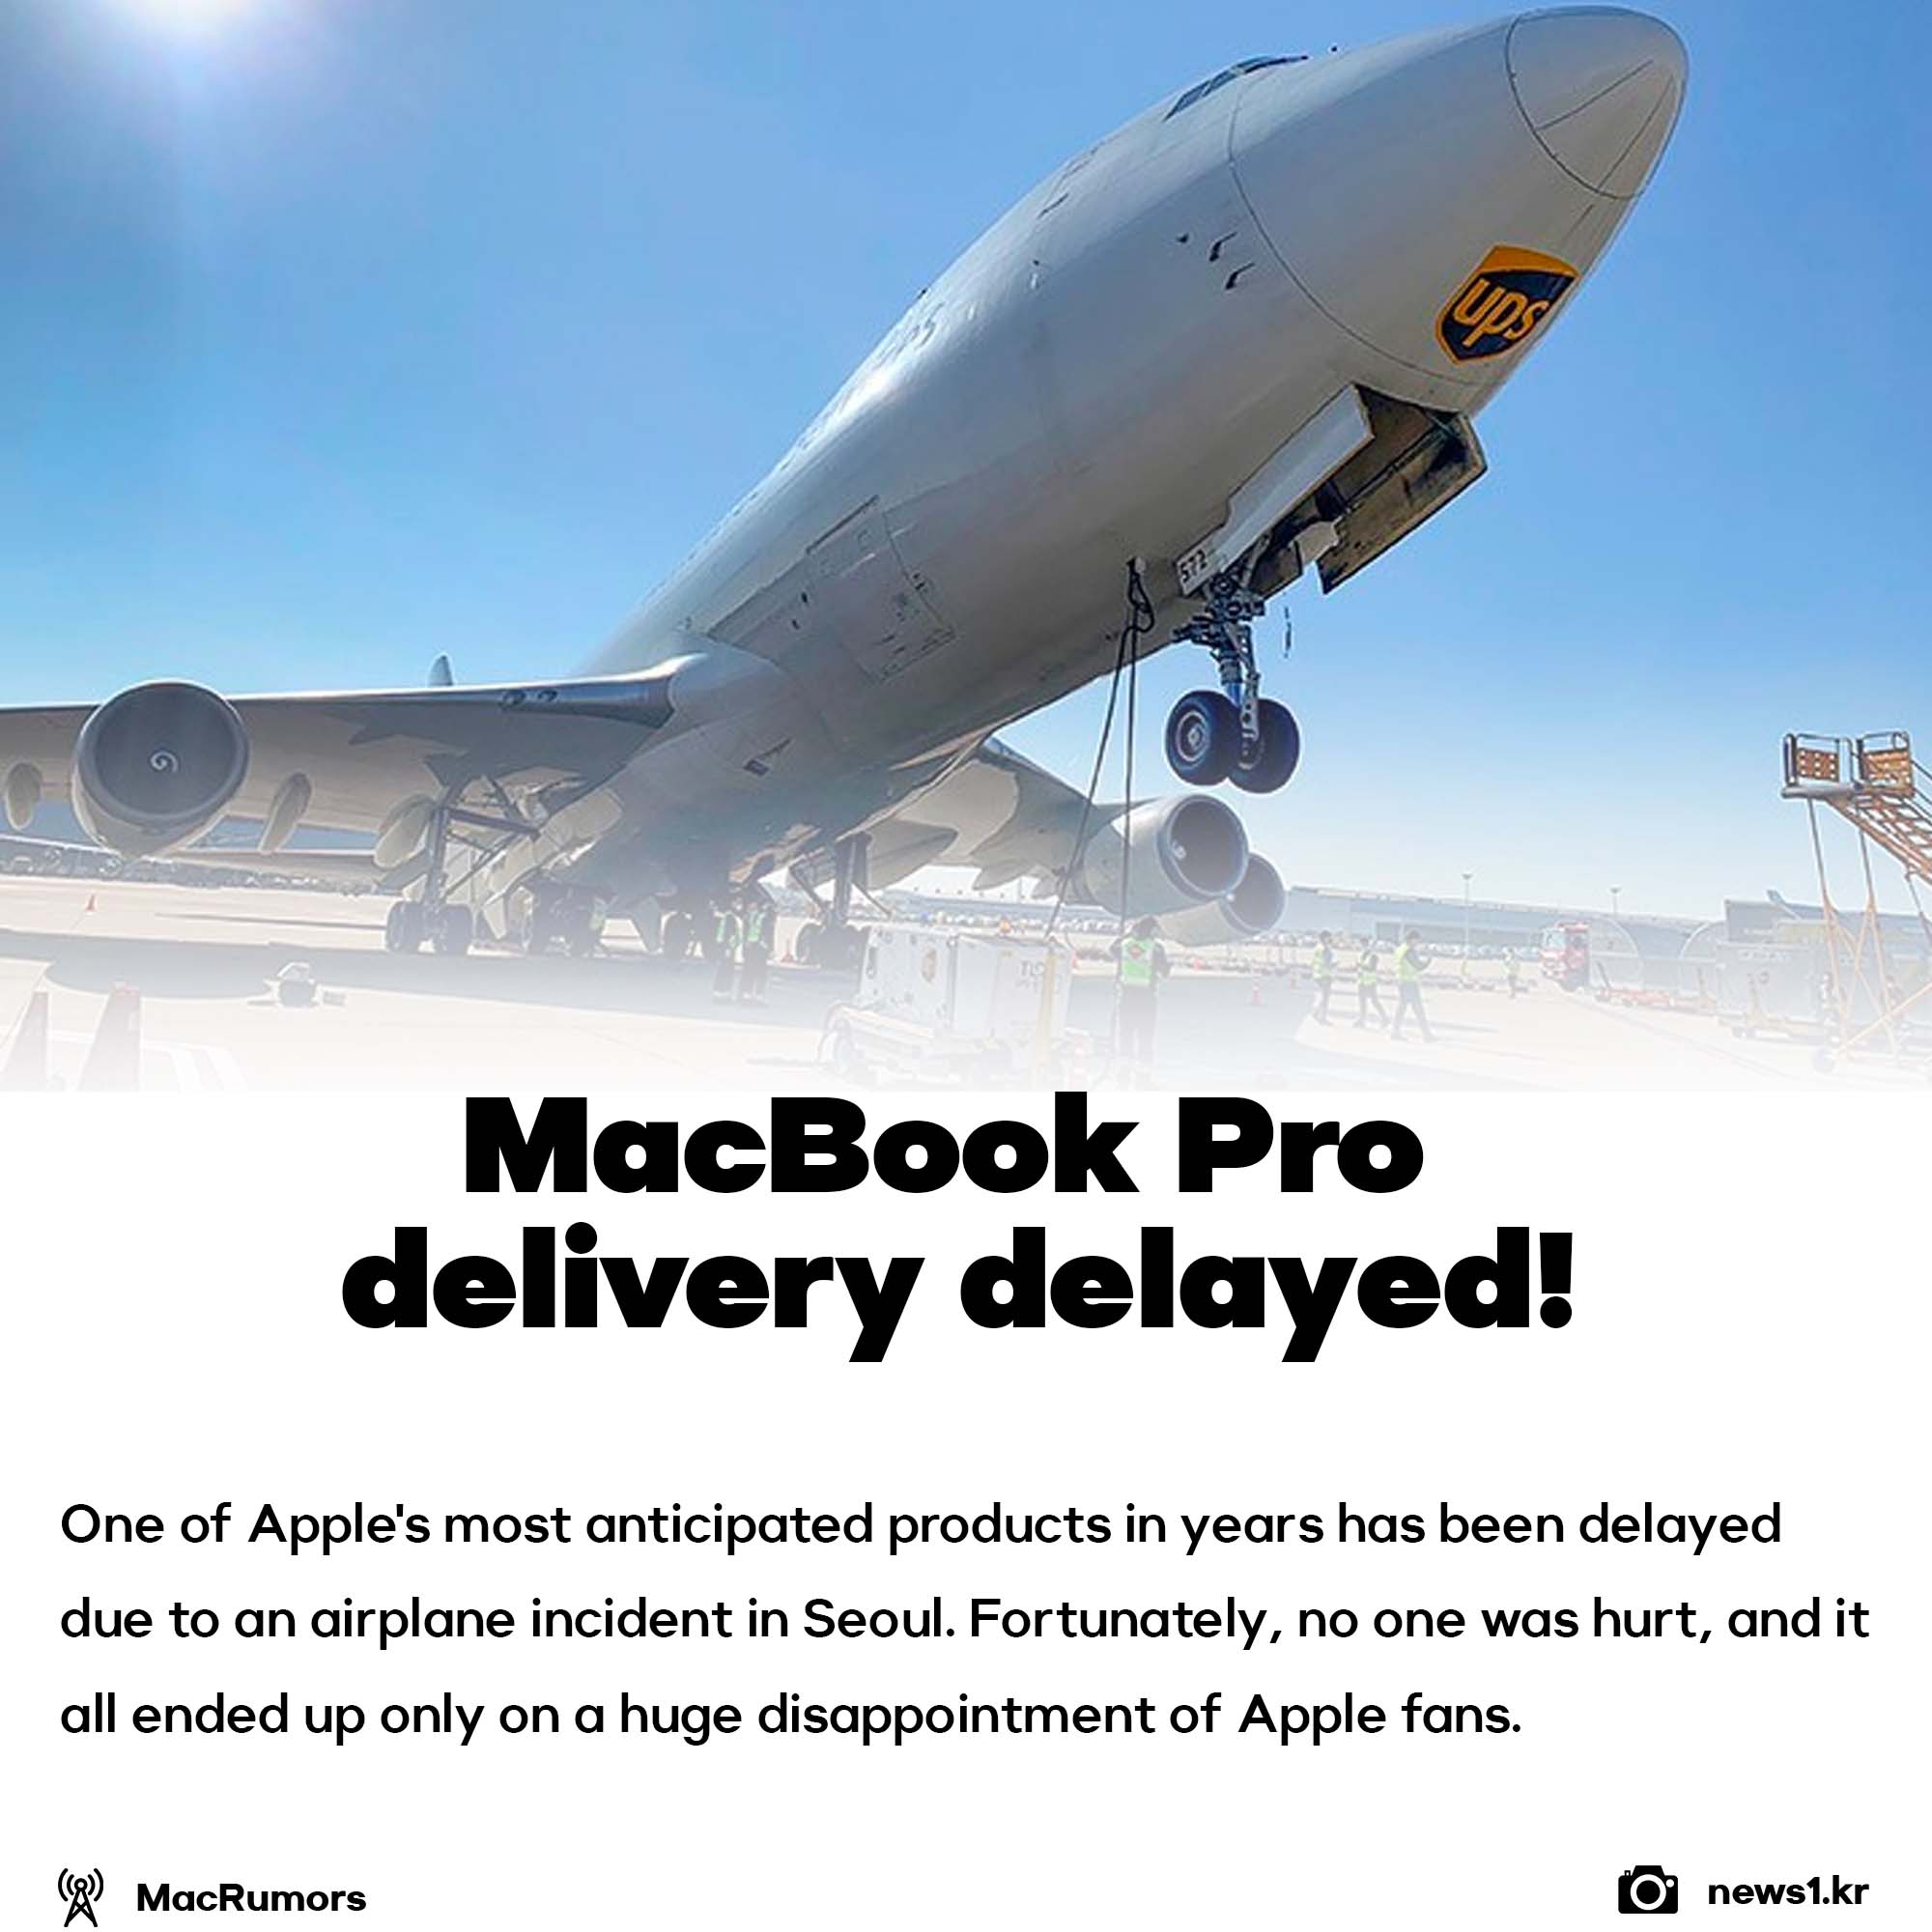 Macbook Pro Delivery delayed because of an airplane incident